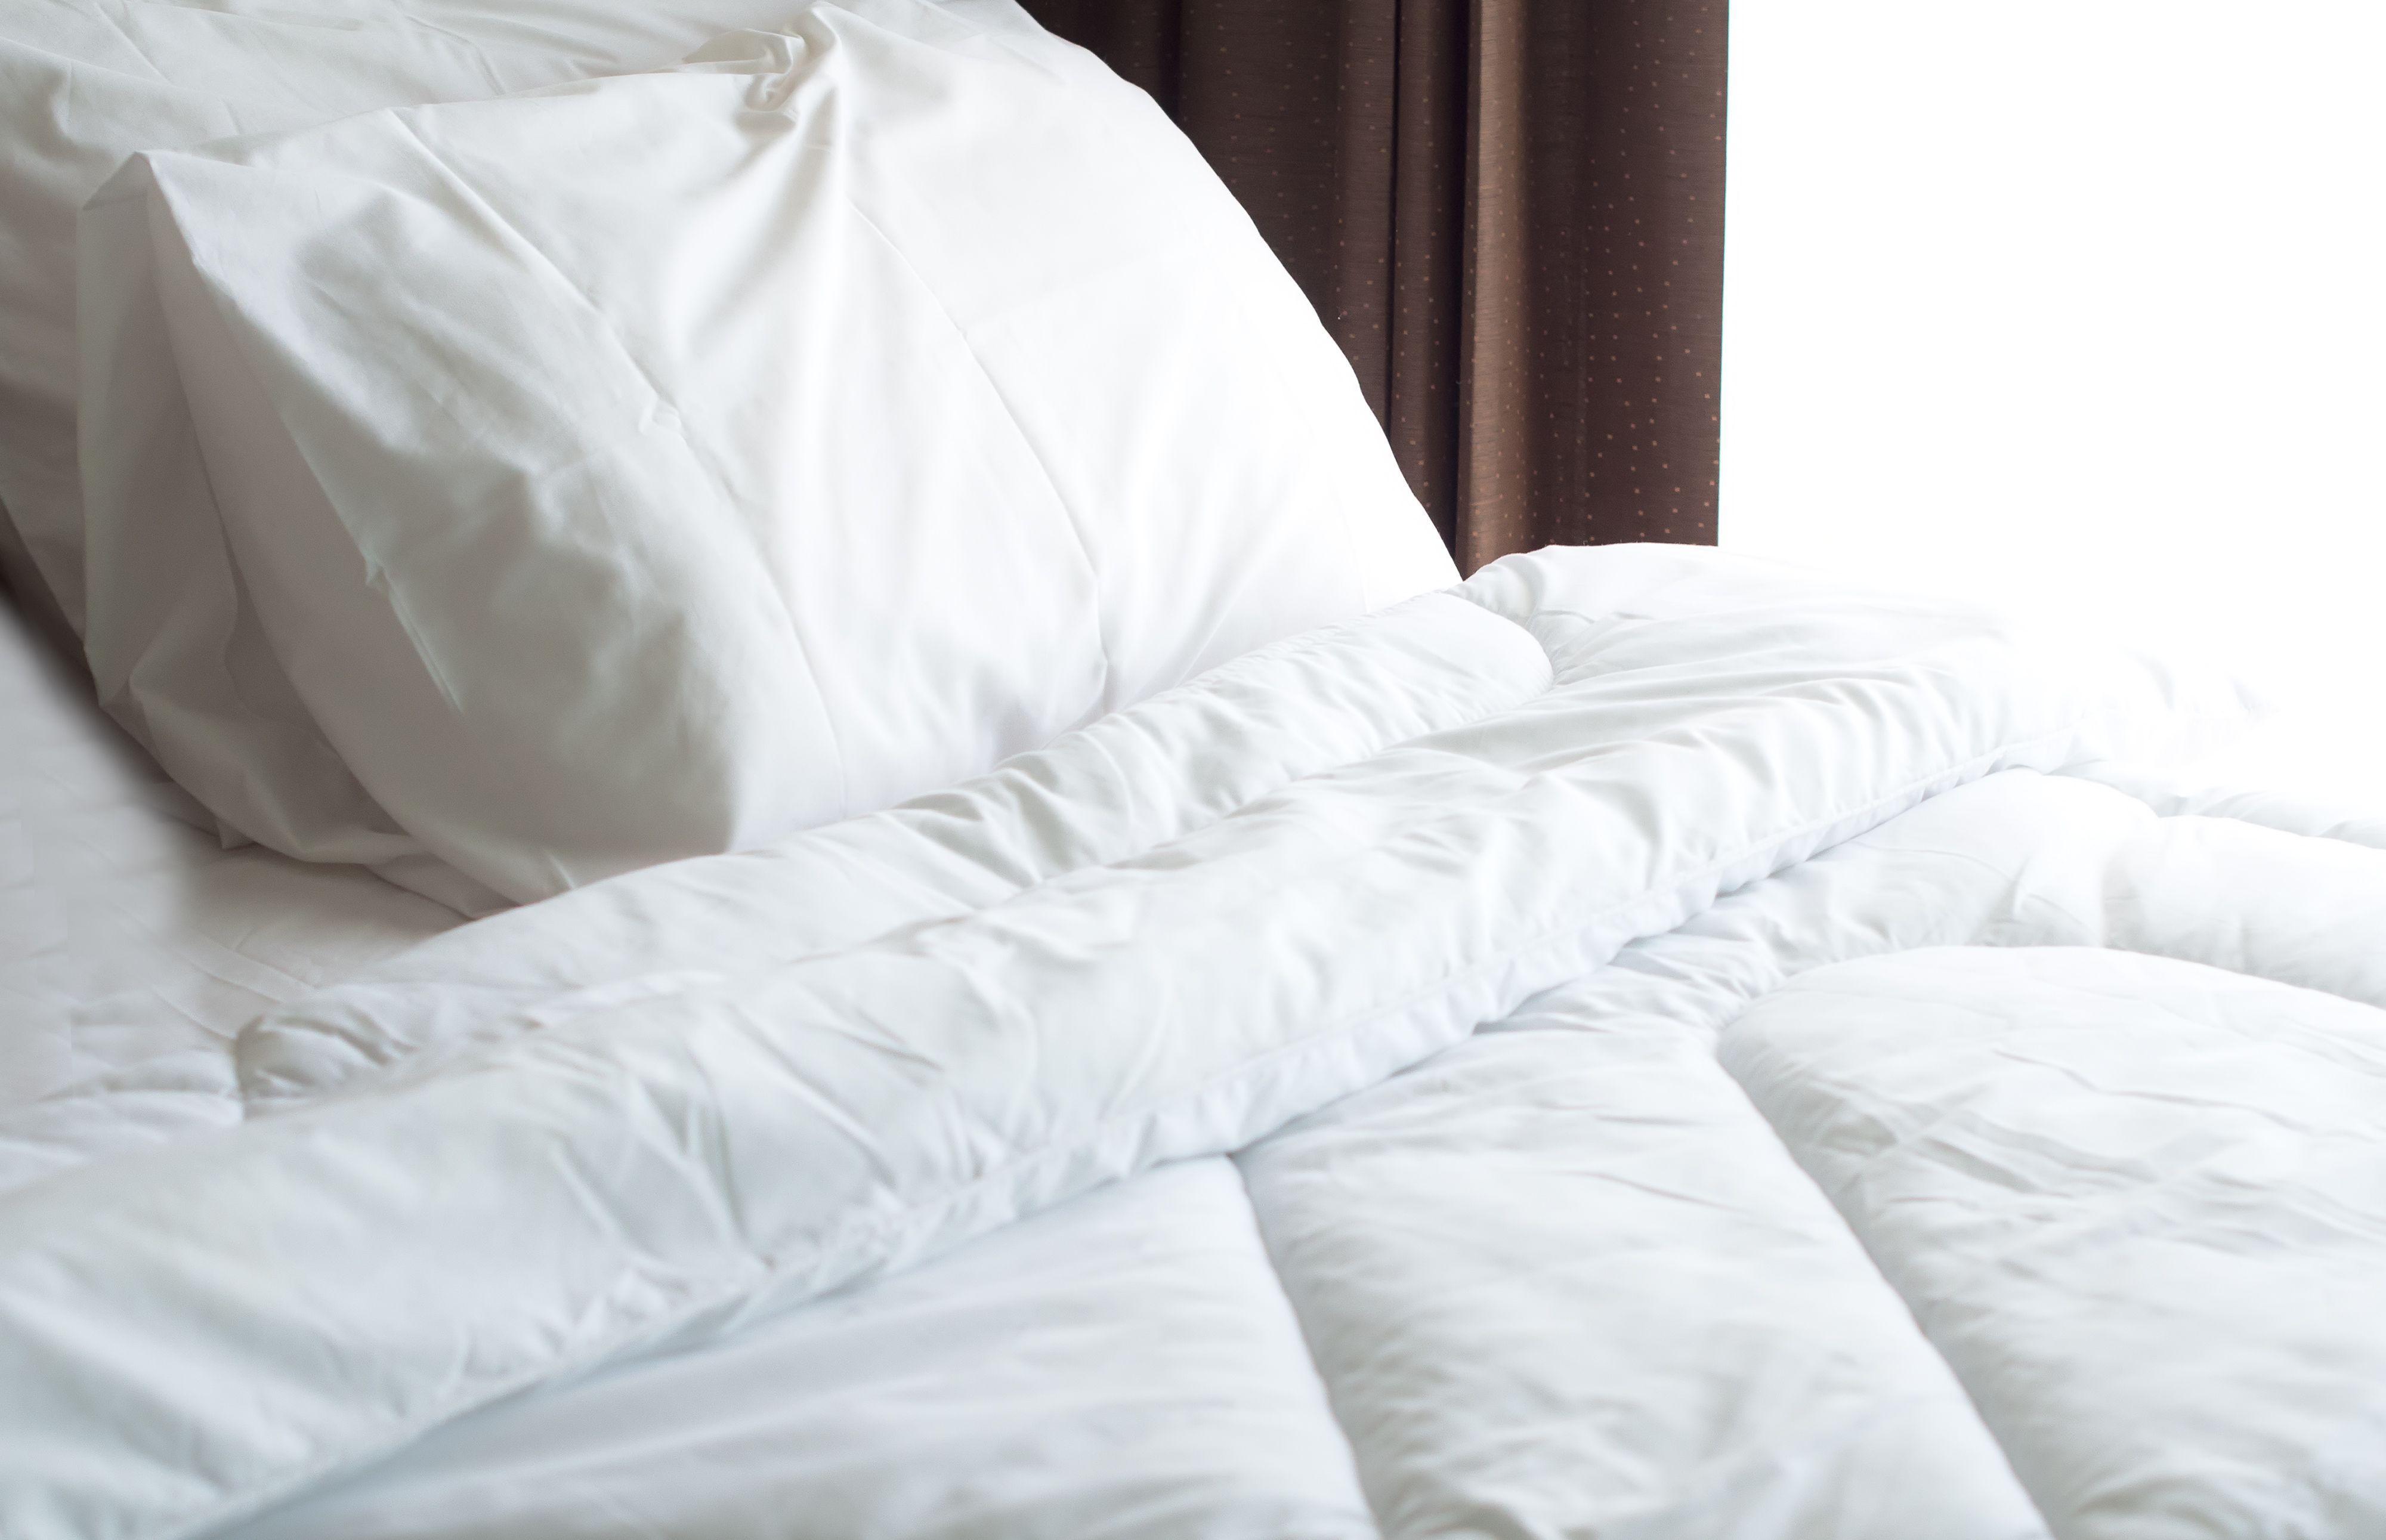 Bed Sheet Sizes Buying Guide